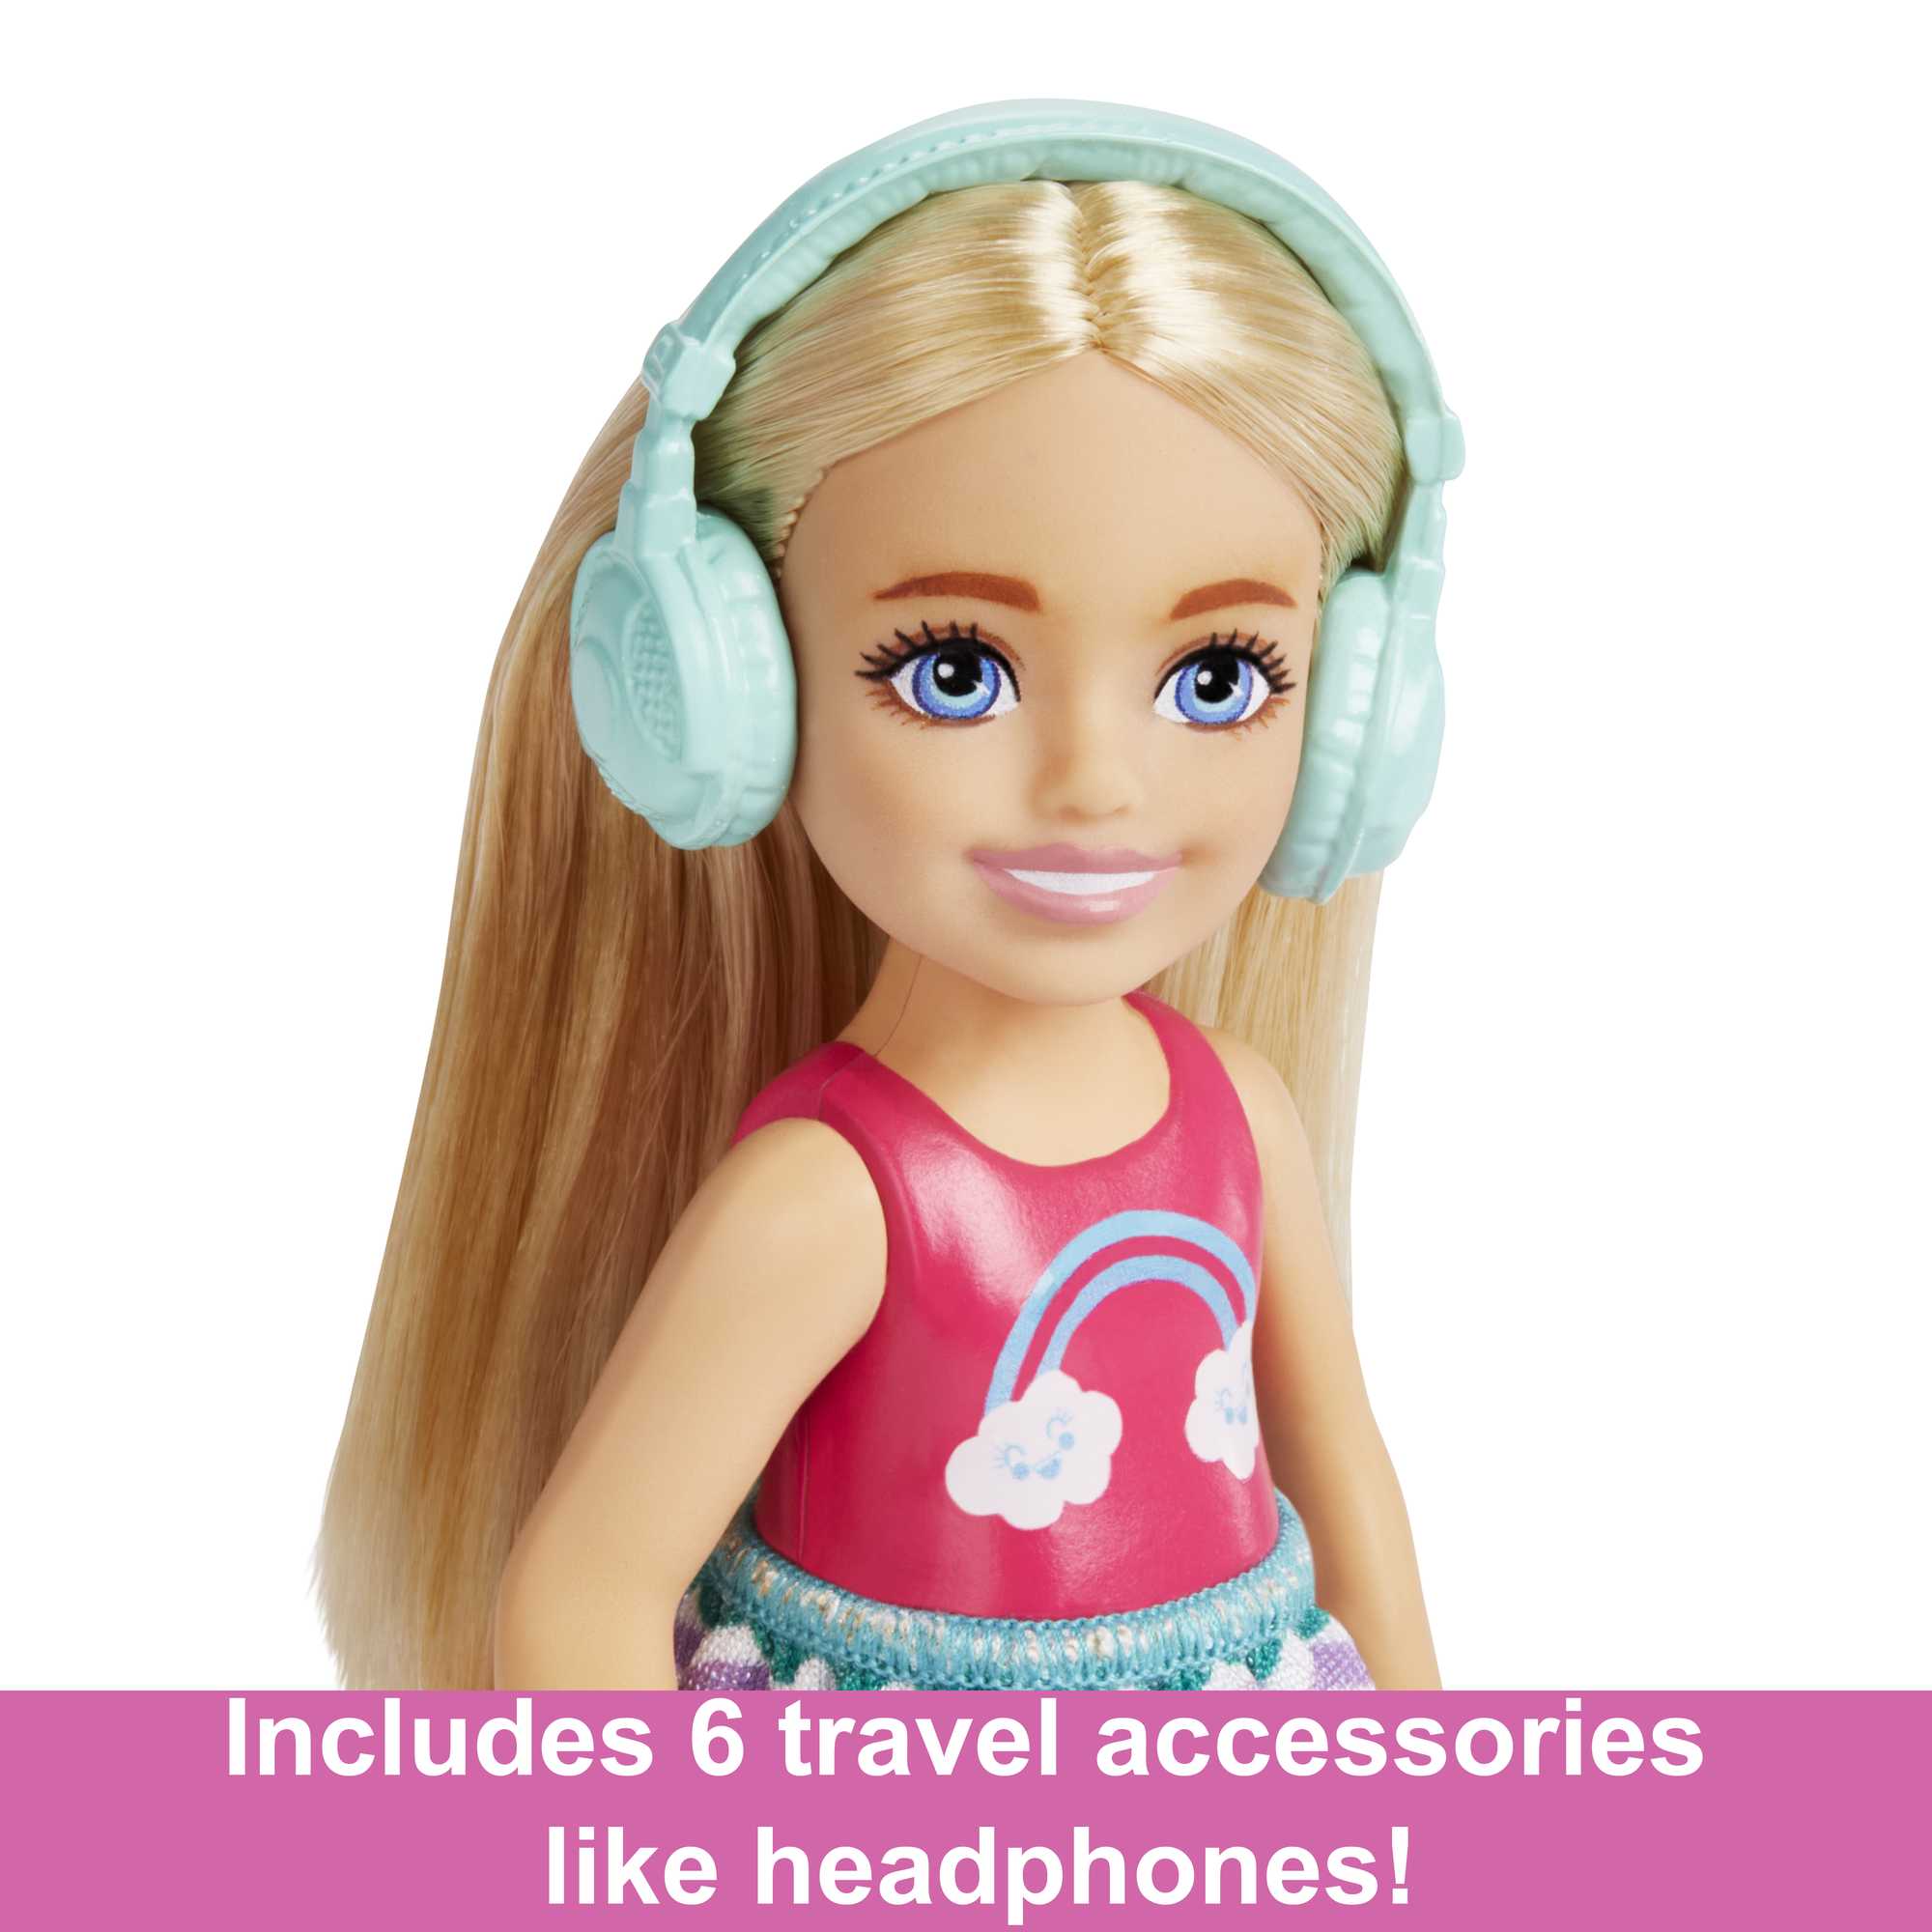 Barbie Chelsea Doll And Accessories Small Doll Travel Set With Puppy